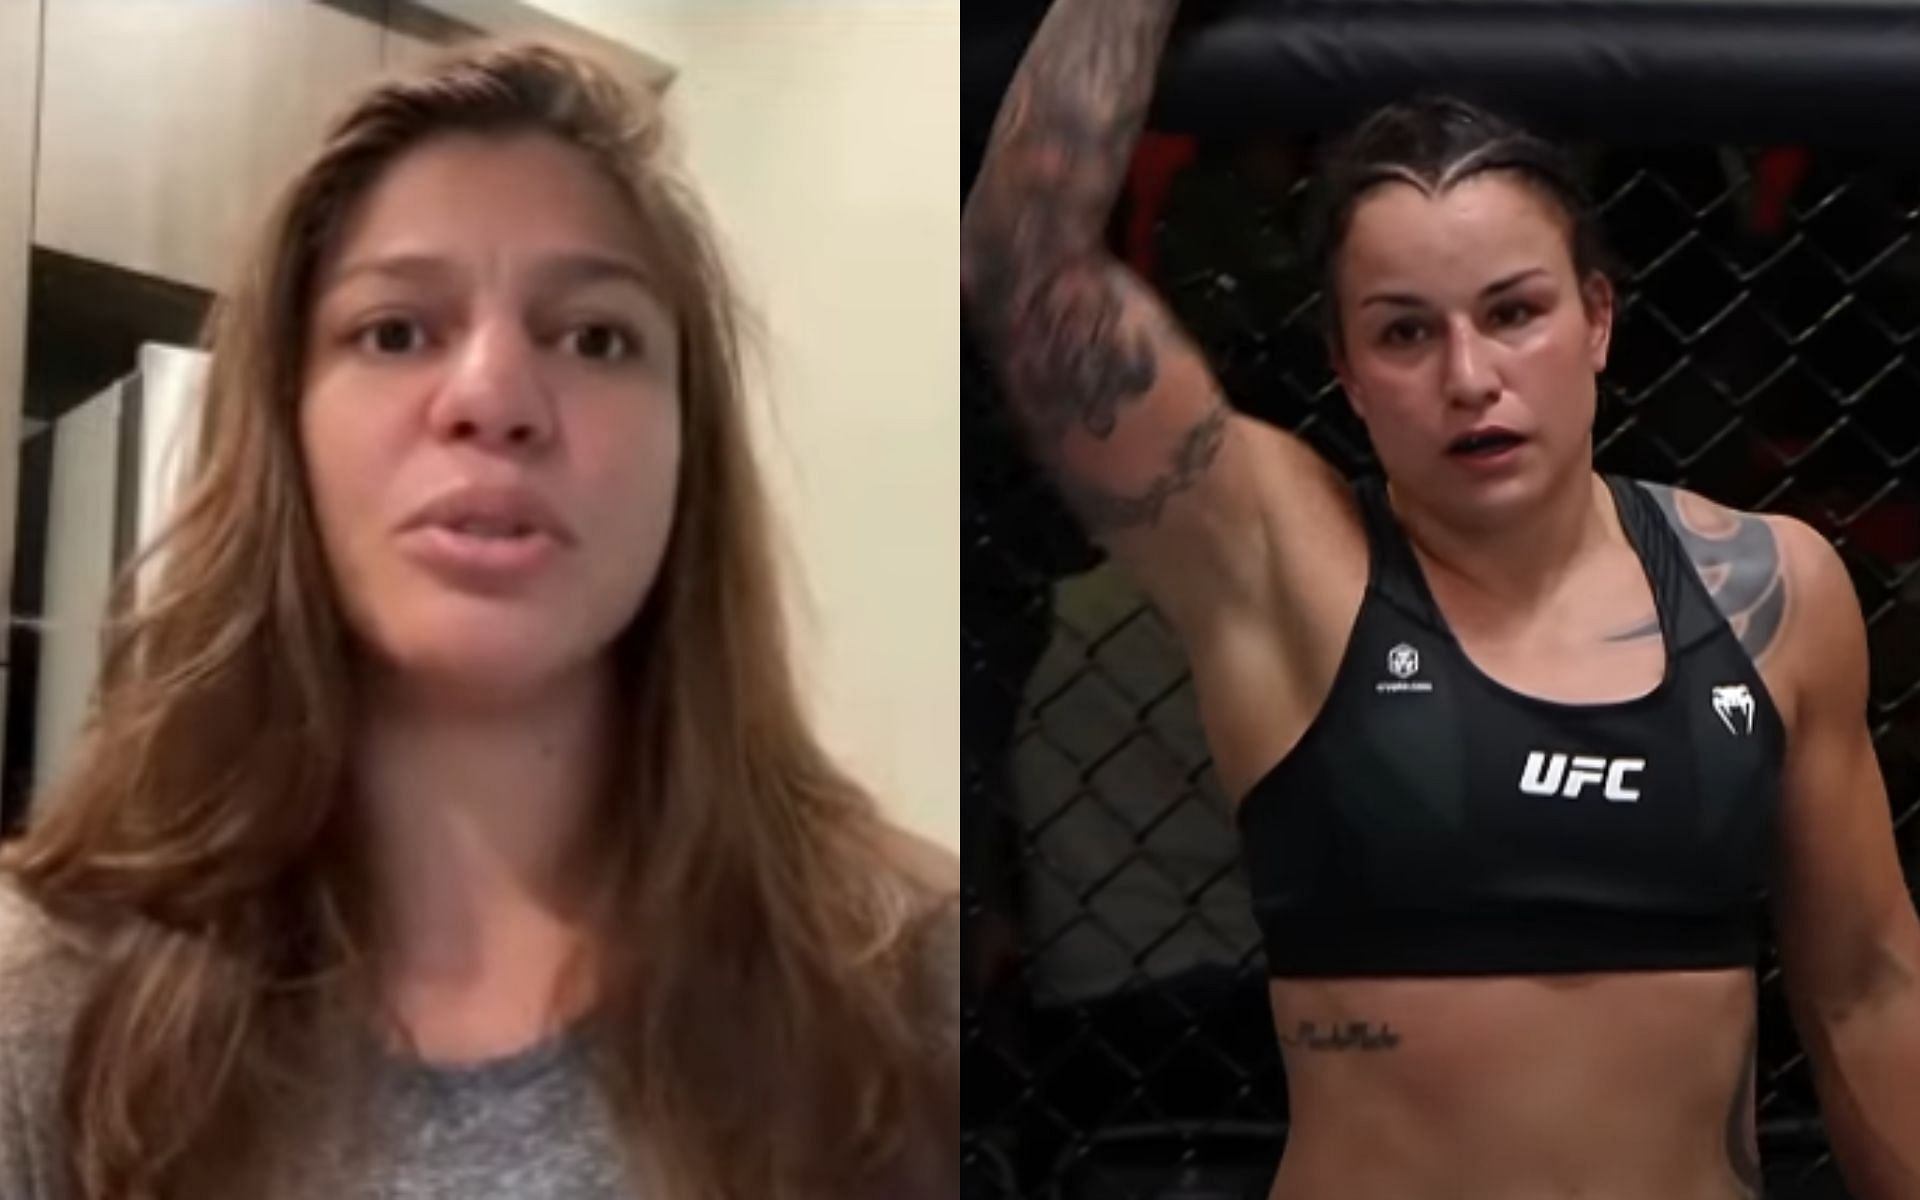 Mayra Bueno Silva [Left] says she is aware that fans are critical of her bout against Raquel Pennington [Right] [Image courtesy: Middle Easy and UFC - YouTube] 